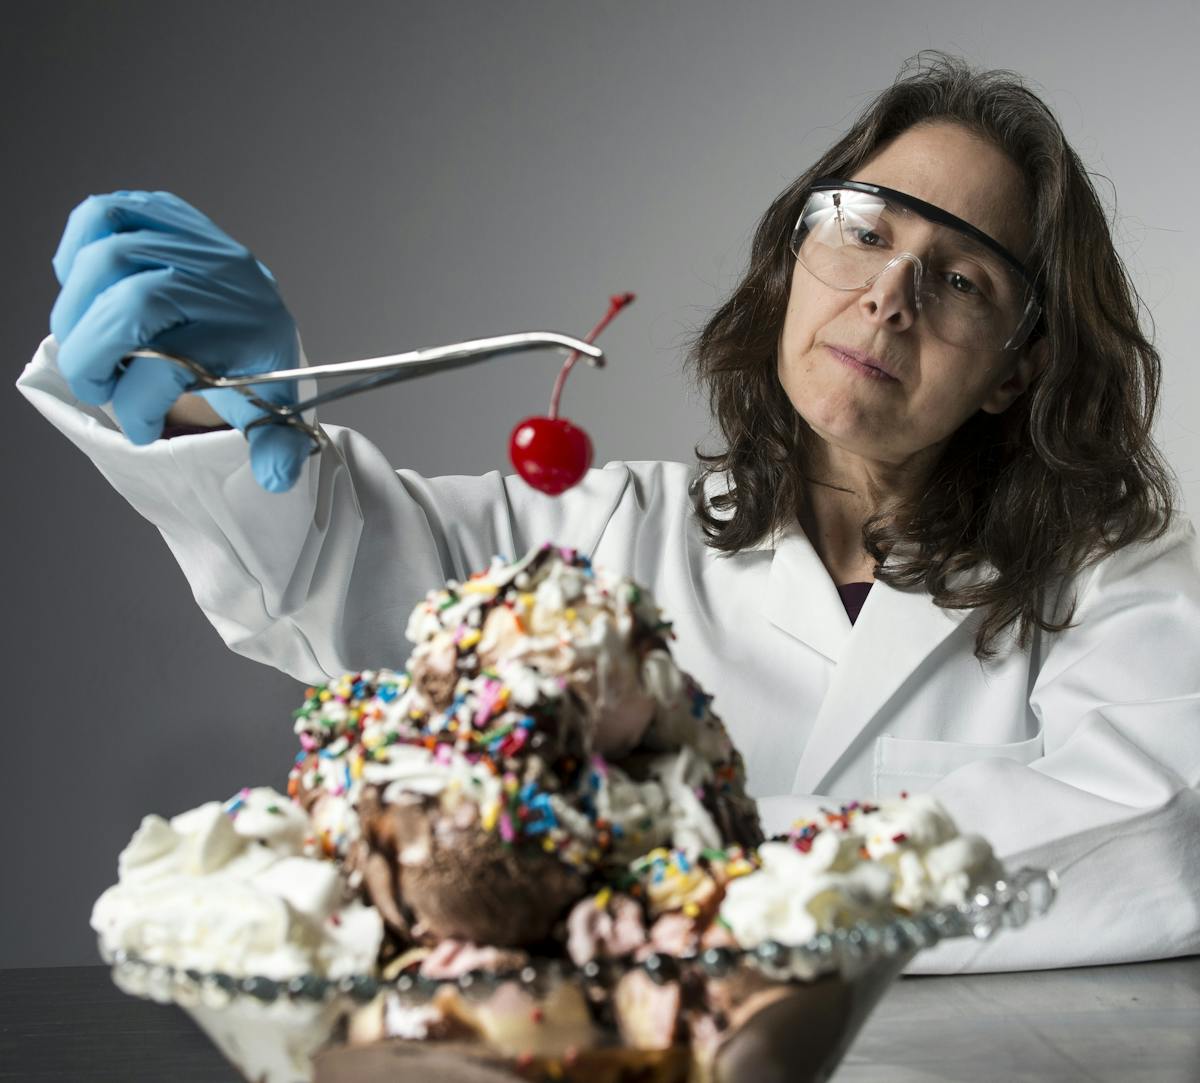 Traci Mann is photographed maker a large ice cream sundae in the Star Tribune studio on Tuesday, March 17, 2015. ] (Aaron Lavinsky | StarTribune) Prof